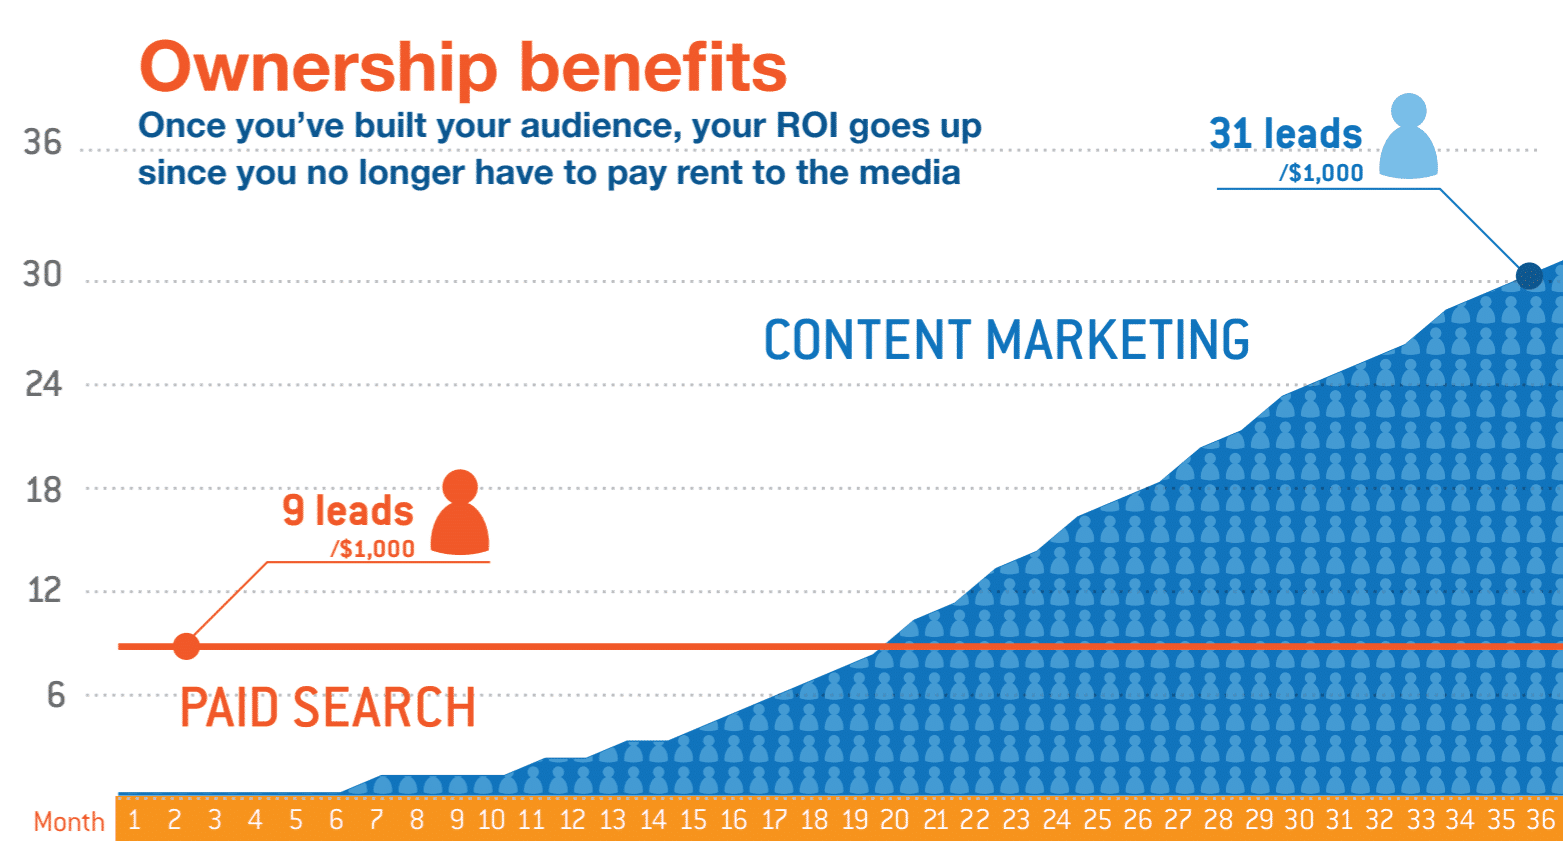 Content marketing vs paid search